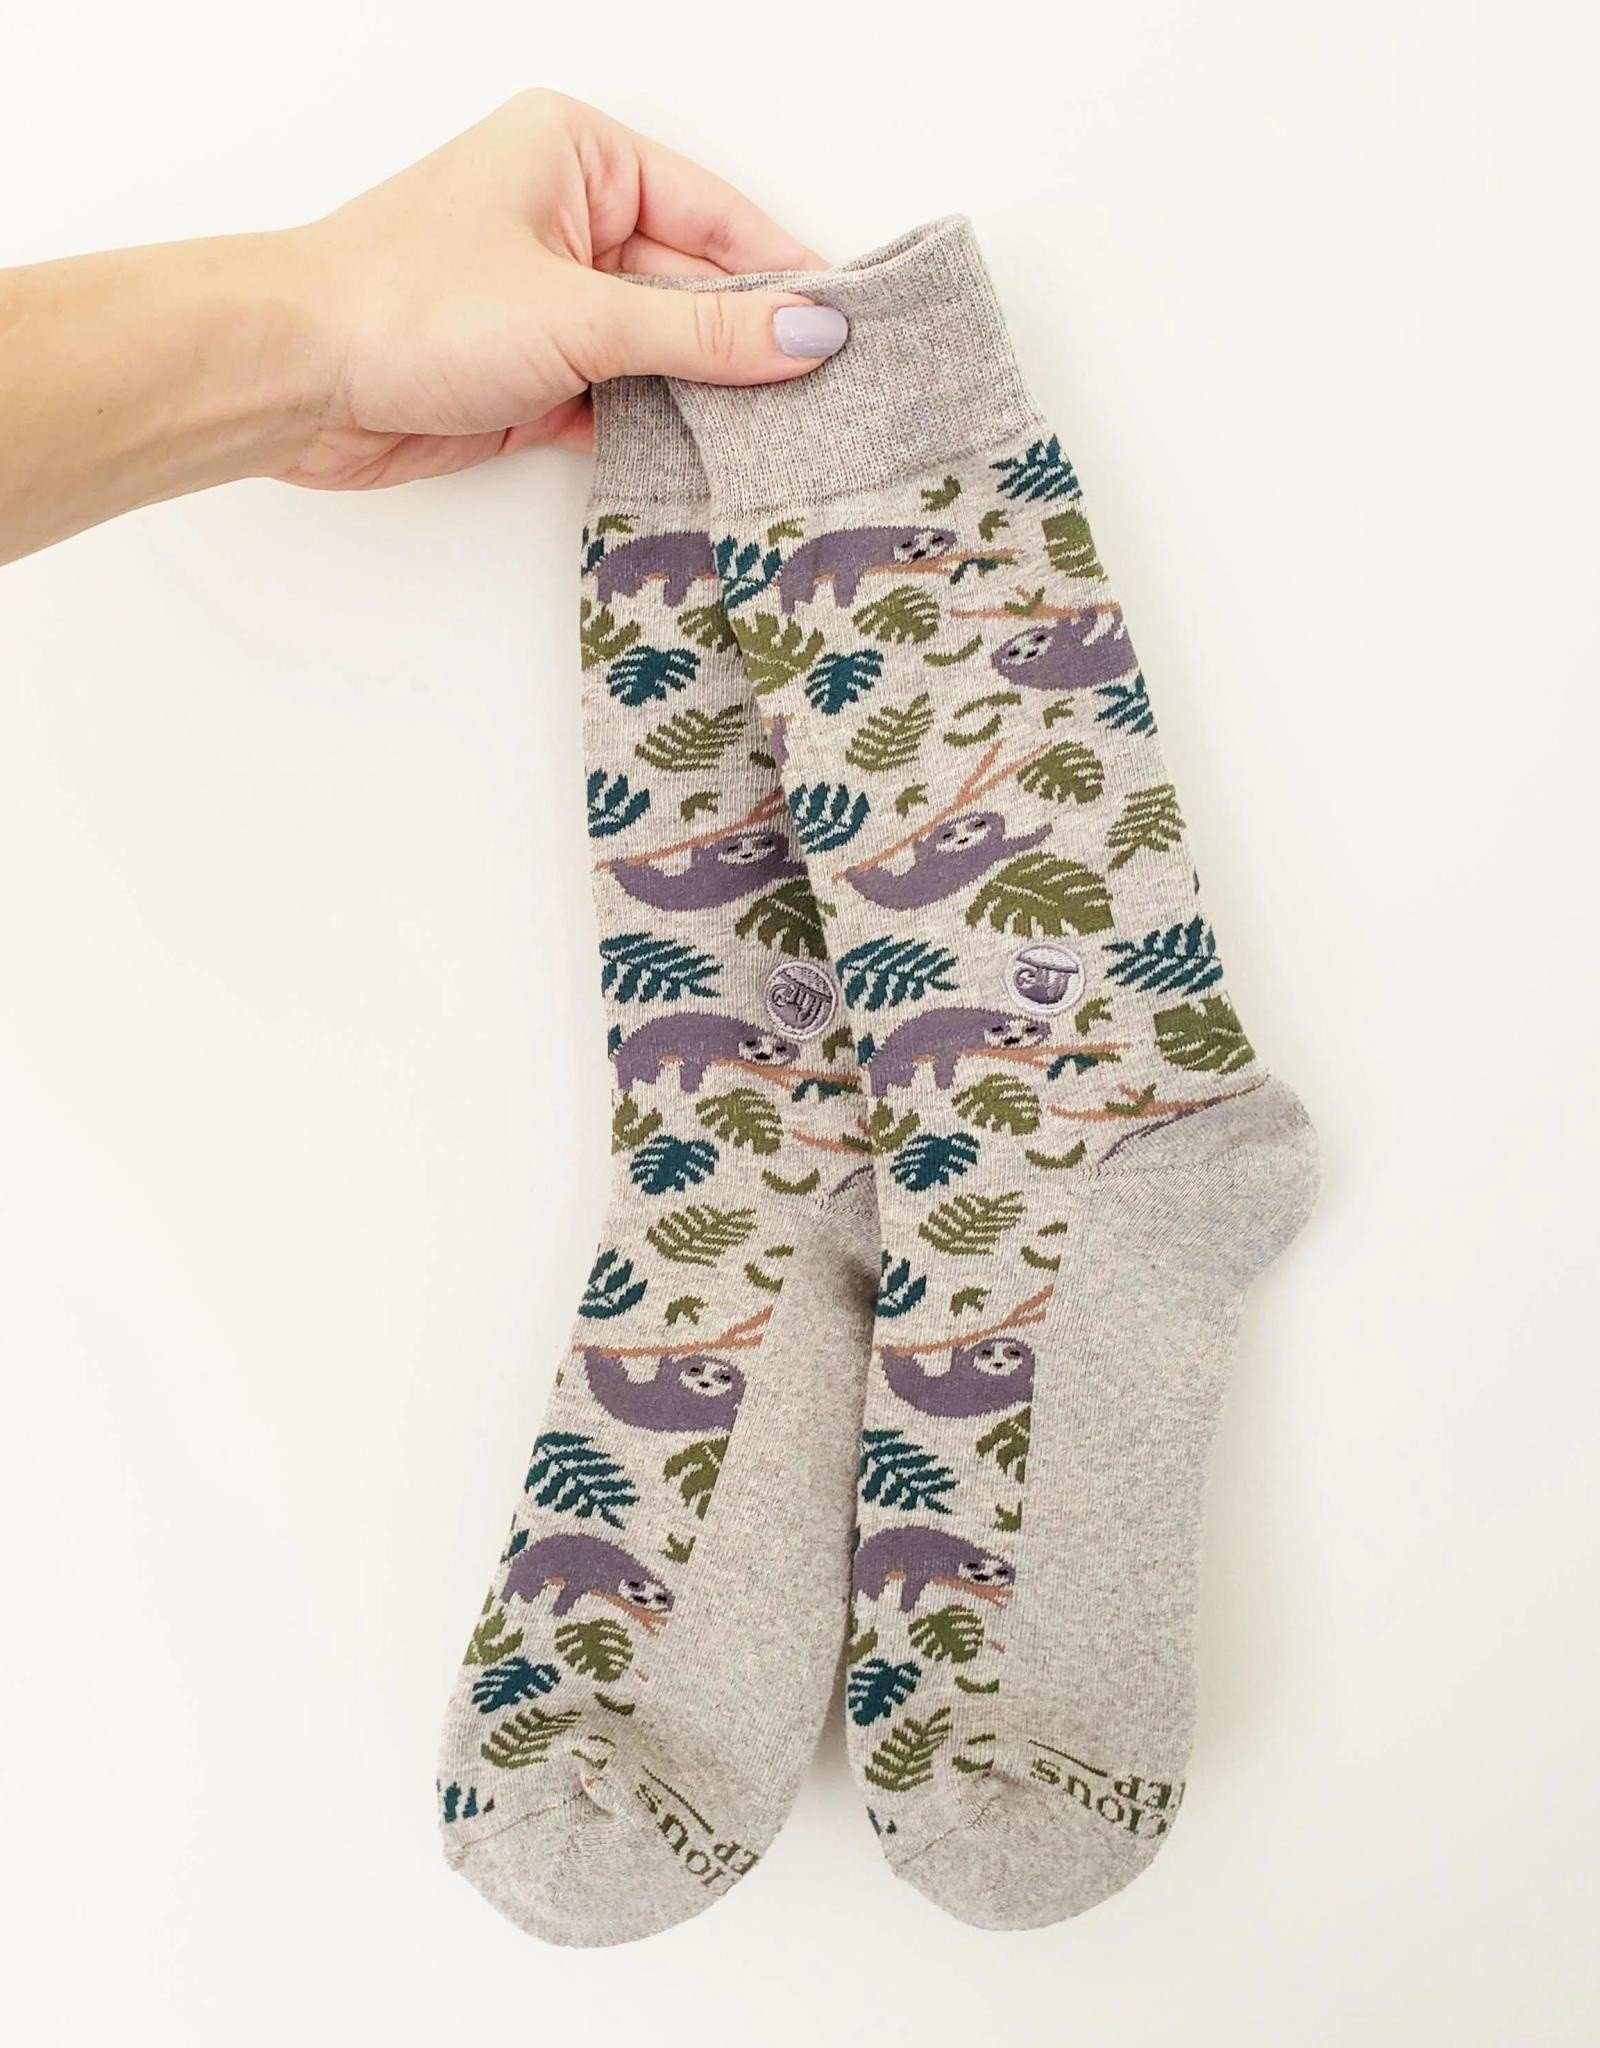 Conscious Step Socks that Protect Sloths